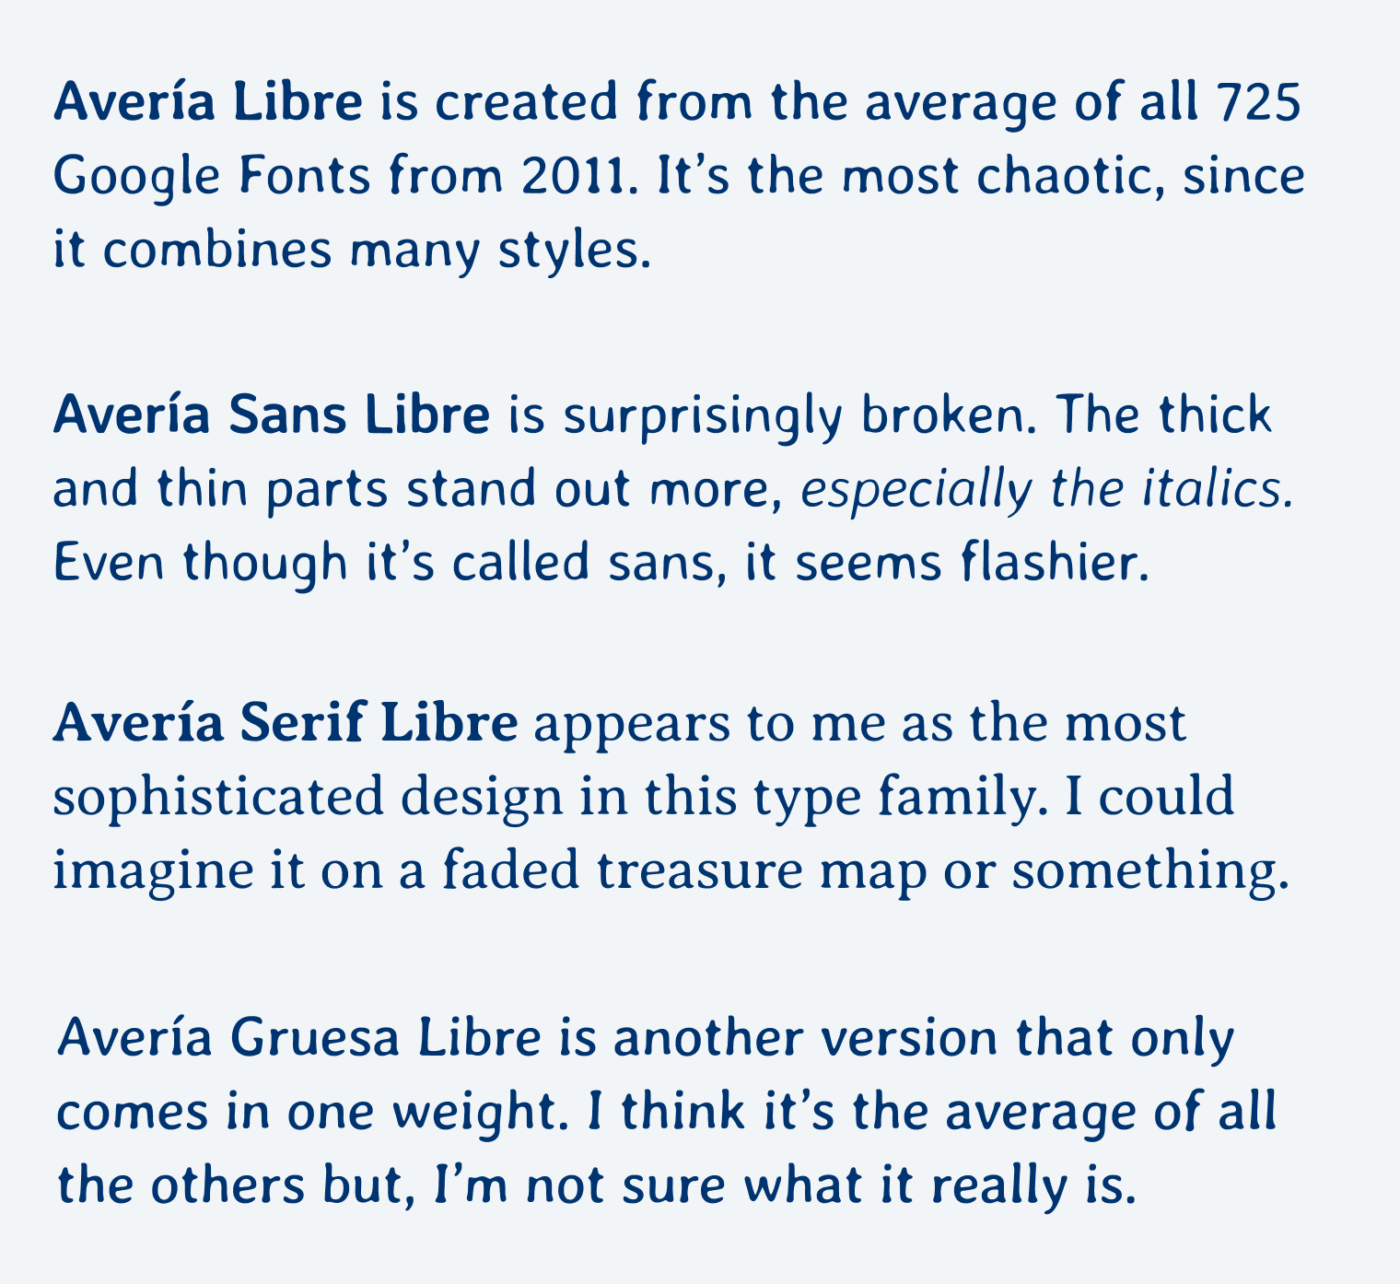 Avería Libre is created from the average of all 725 Google Fonts from 2011. It’s the most chaotic, since it combines many styles. Avería Sans Libre is surprisingly broken. The thick and thin parts stand out more, especially the italics. Even though it’s called sans, it seems flashier. Avería Serif Libre appears to me as the most sophisticated design in this type family. I could imagine it on a faded treasure map or something. Avería Gruesa Libre is another version that only comes in one weight. I think it’s the average of all the others but, I’m not sure what it really is. 